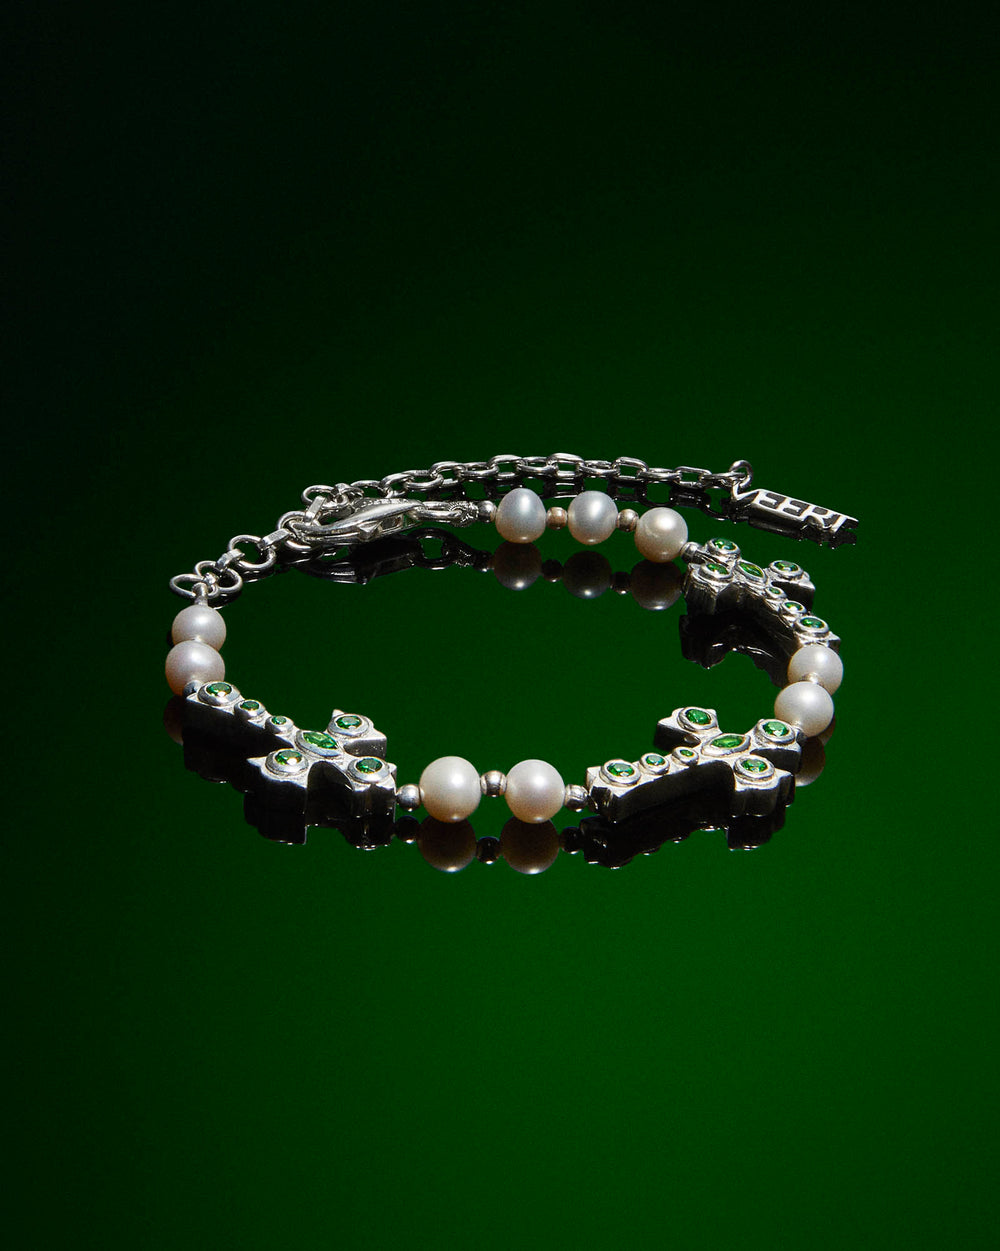 The Cross and Freshwater Pearl Bracelet in White Gold